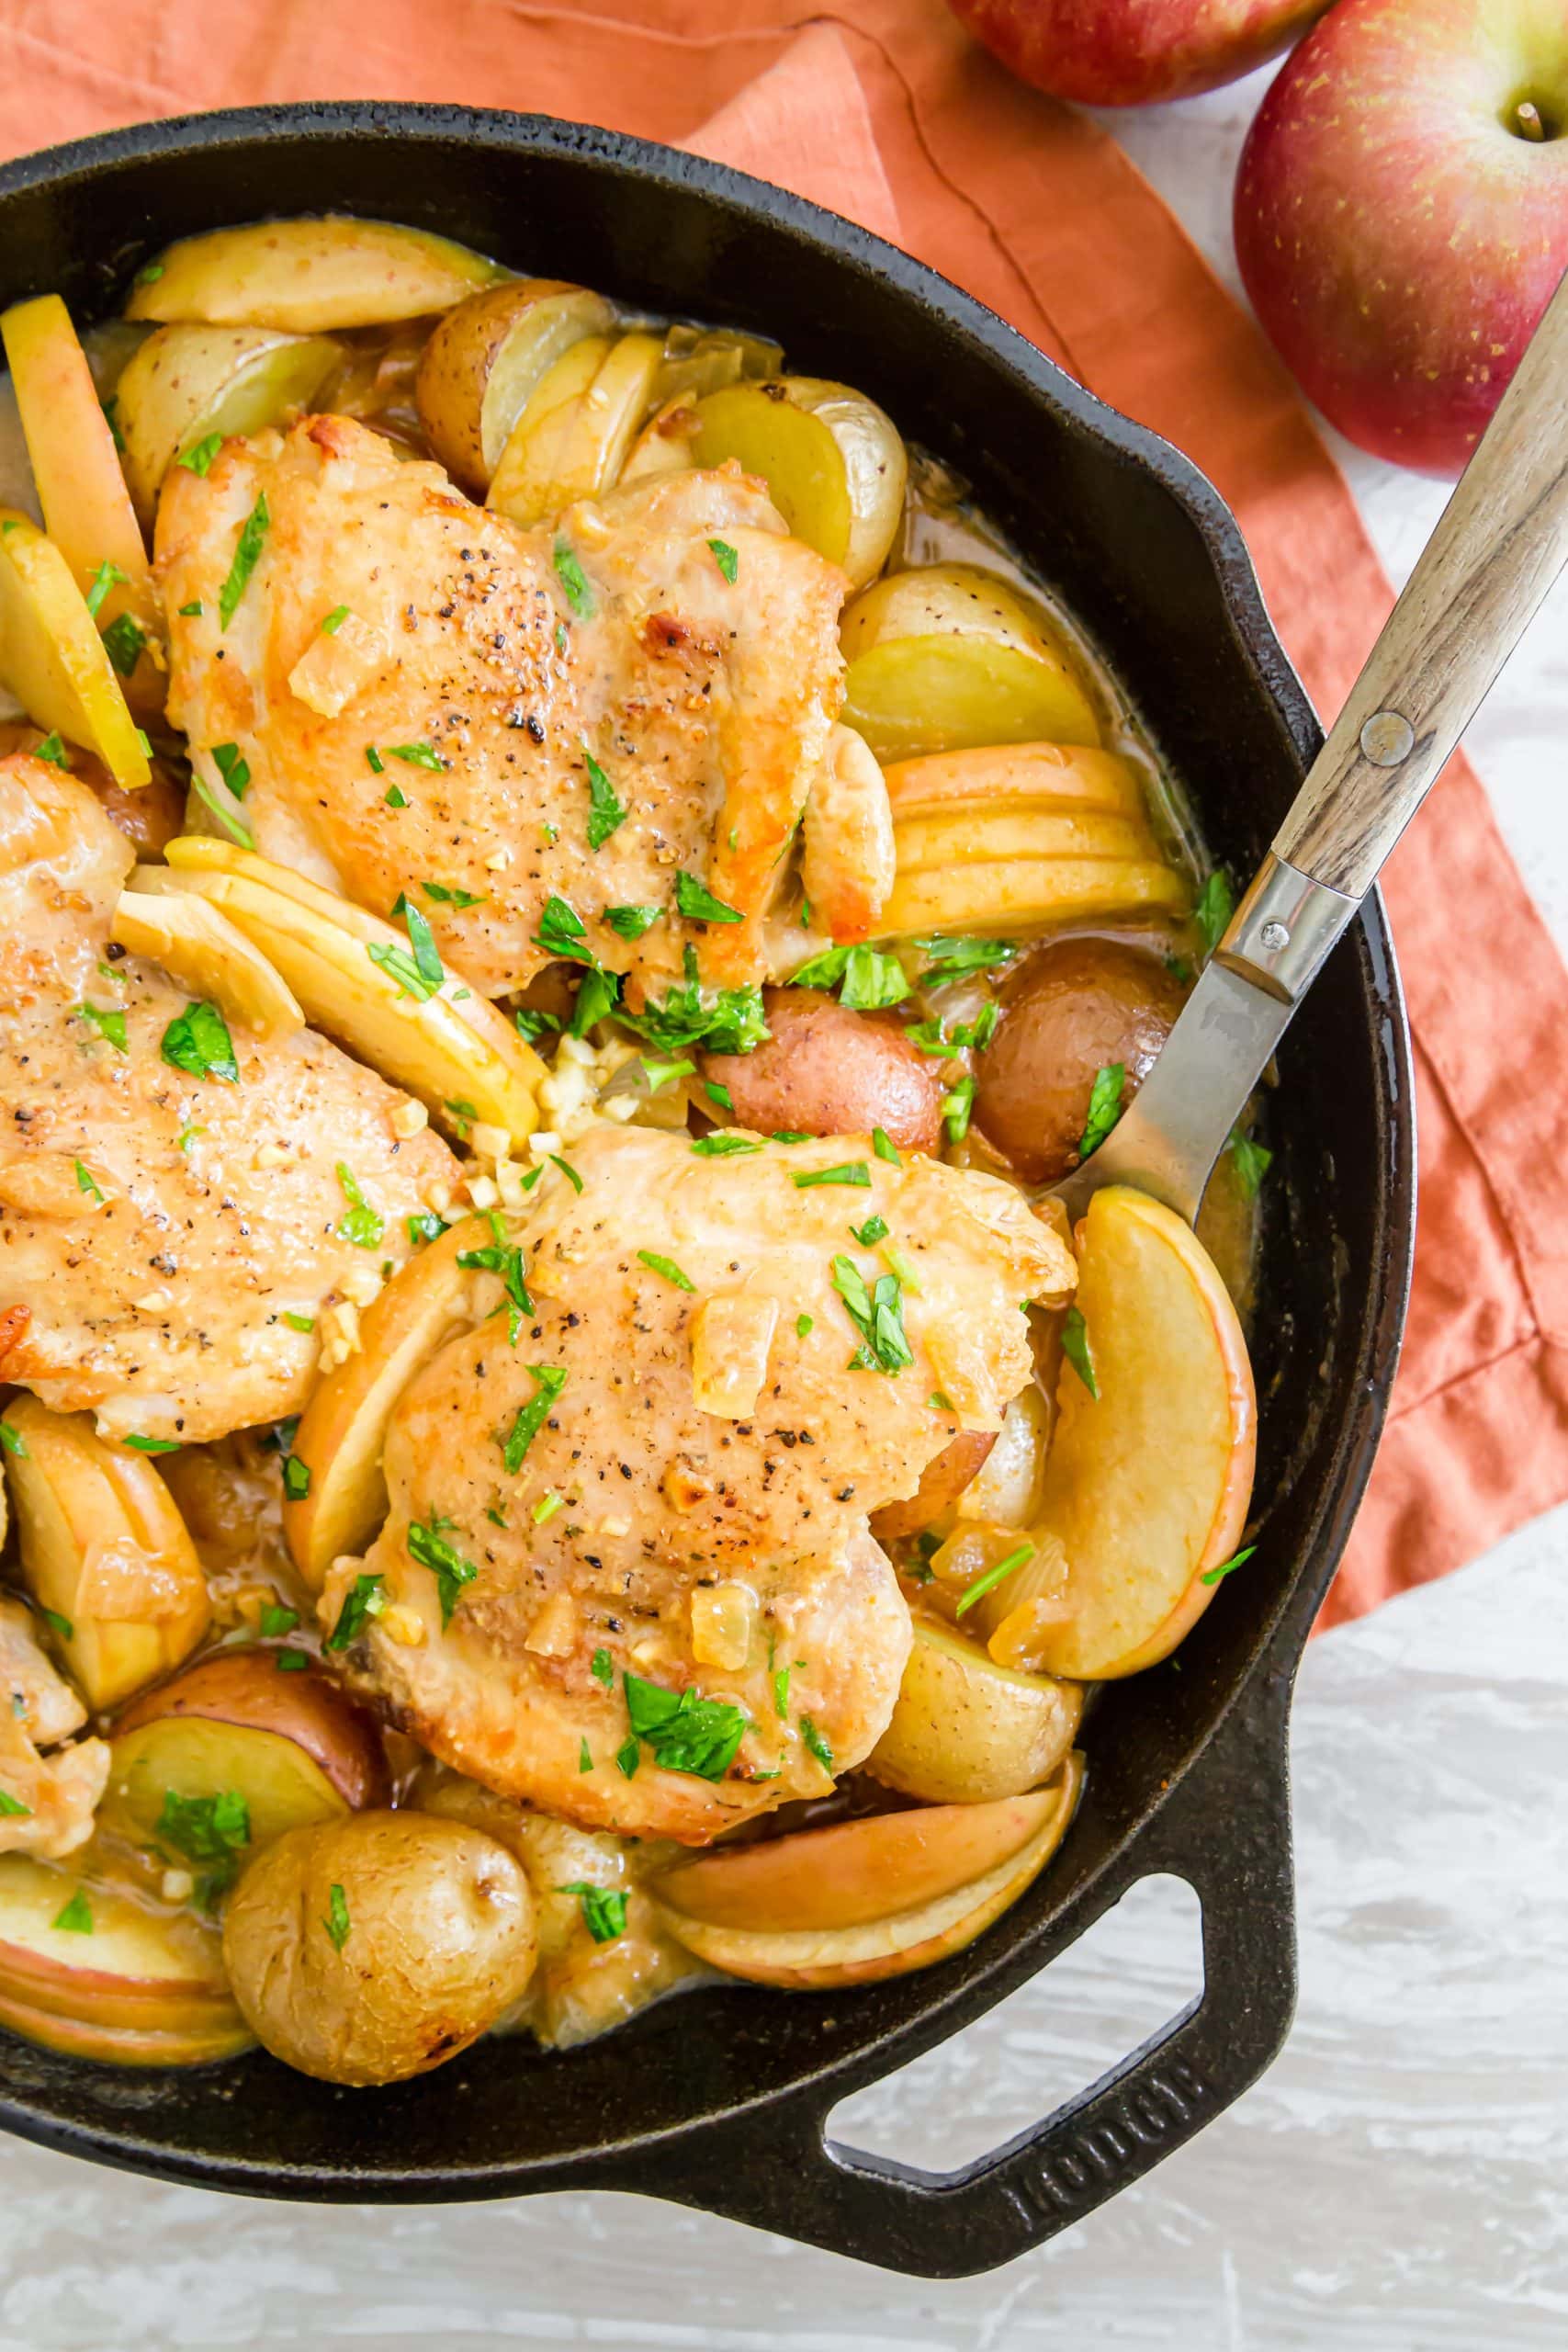 Chicken and potatoes cooked in a cast iron skillet.